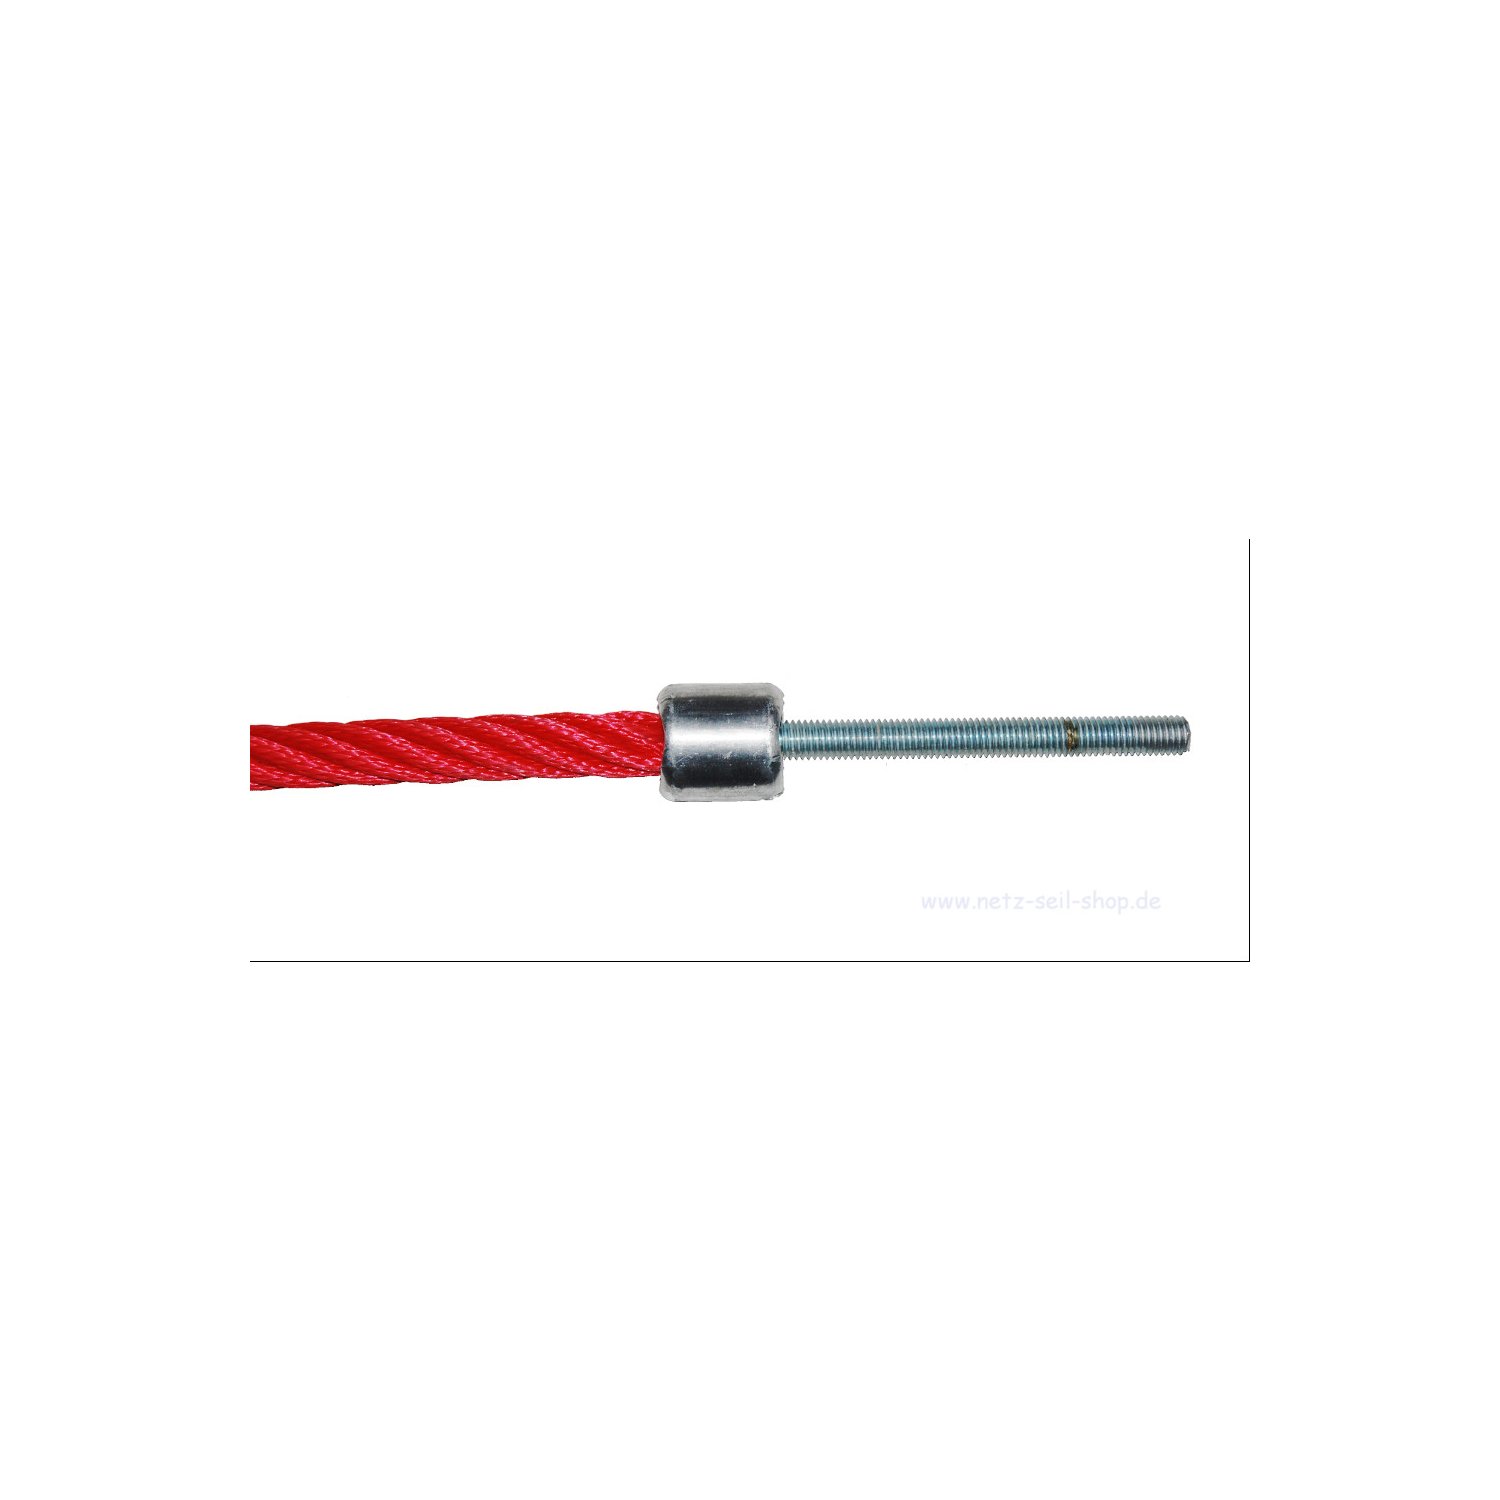 Stainless steel threaded bolt M12 x 180 mm, V2A, directly pressed [13,68 EUR]